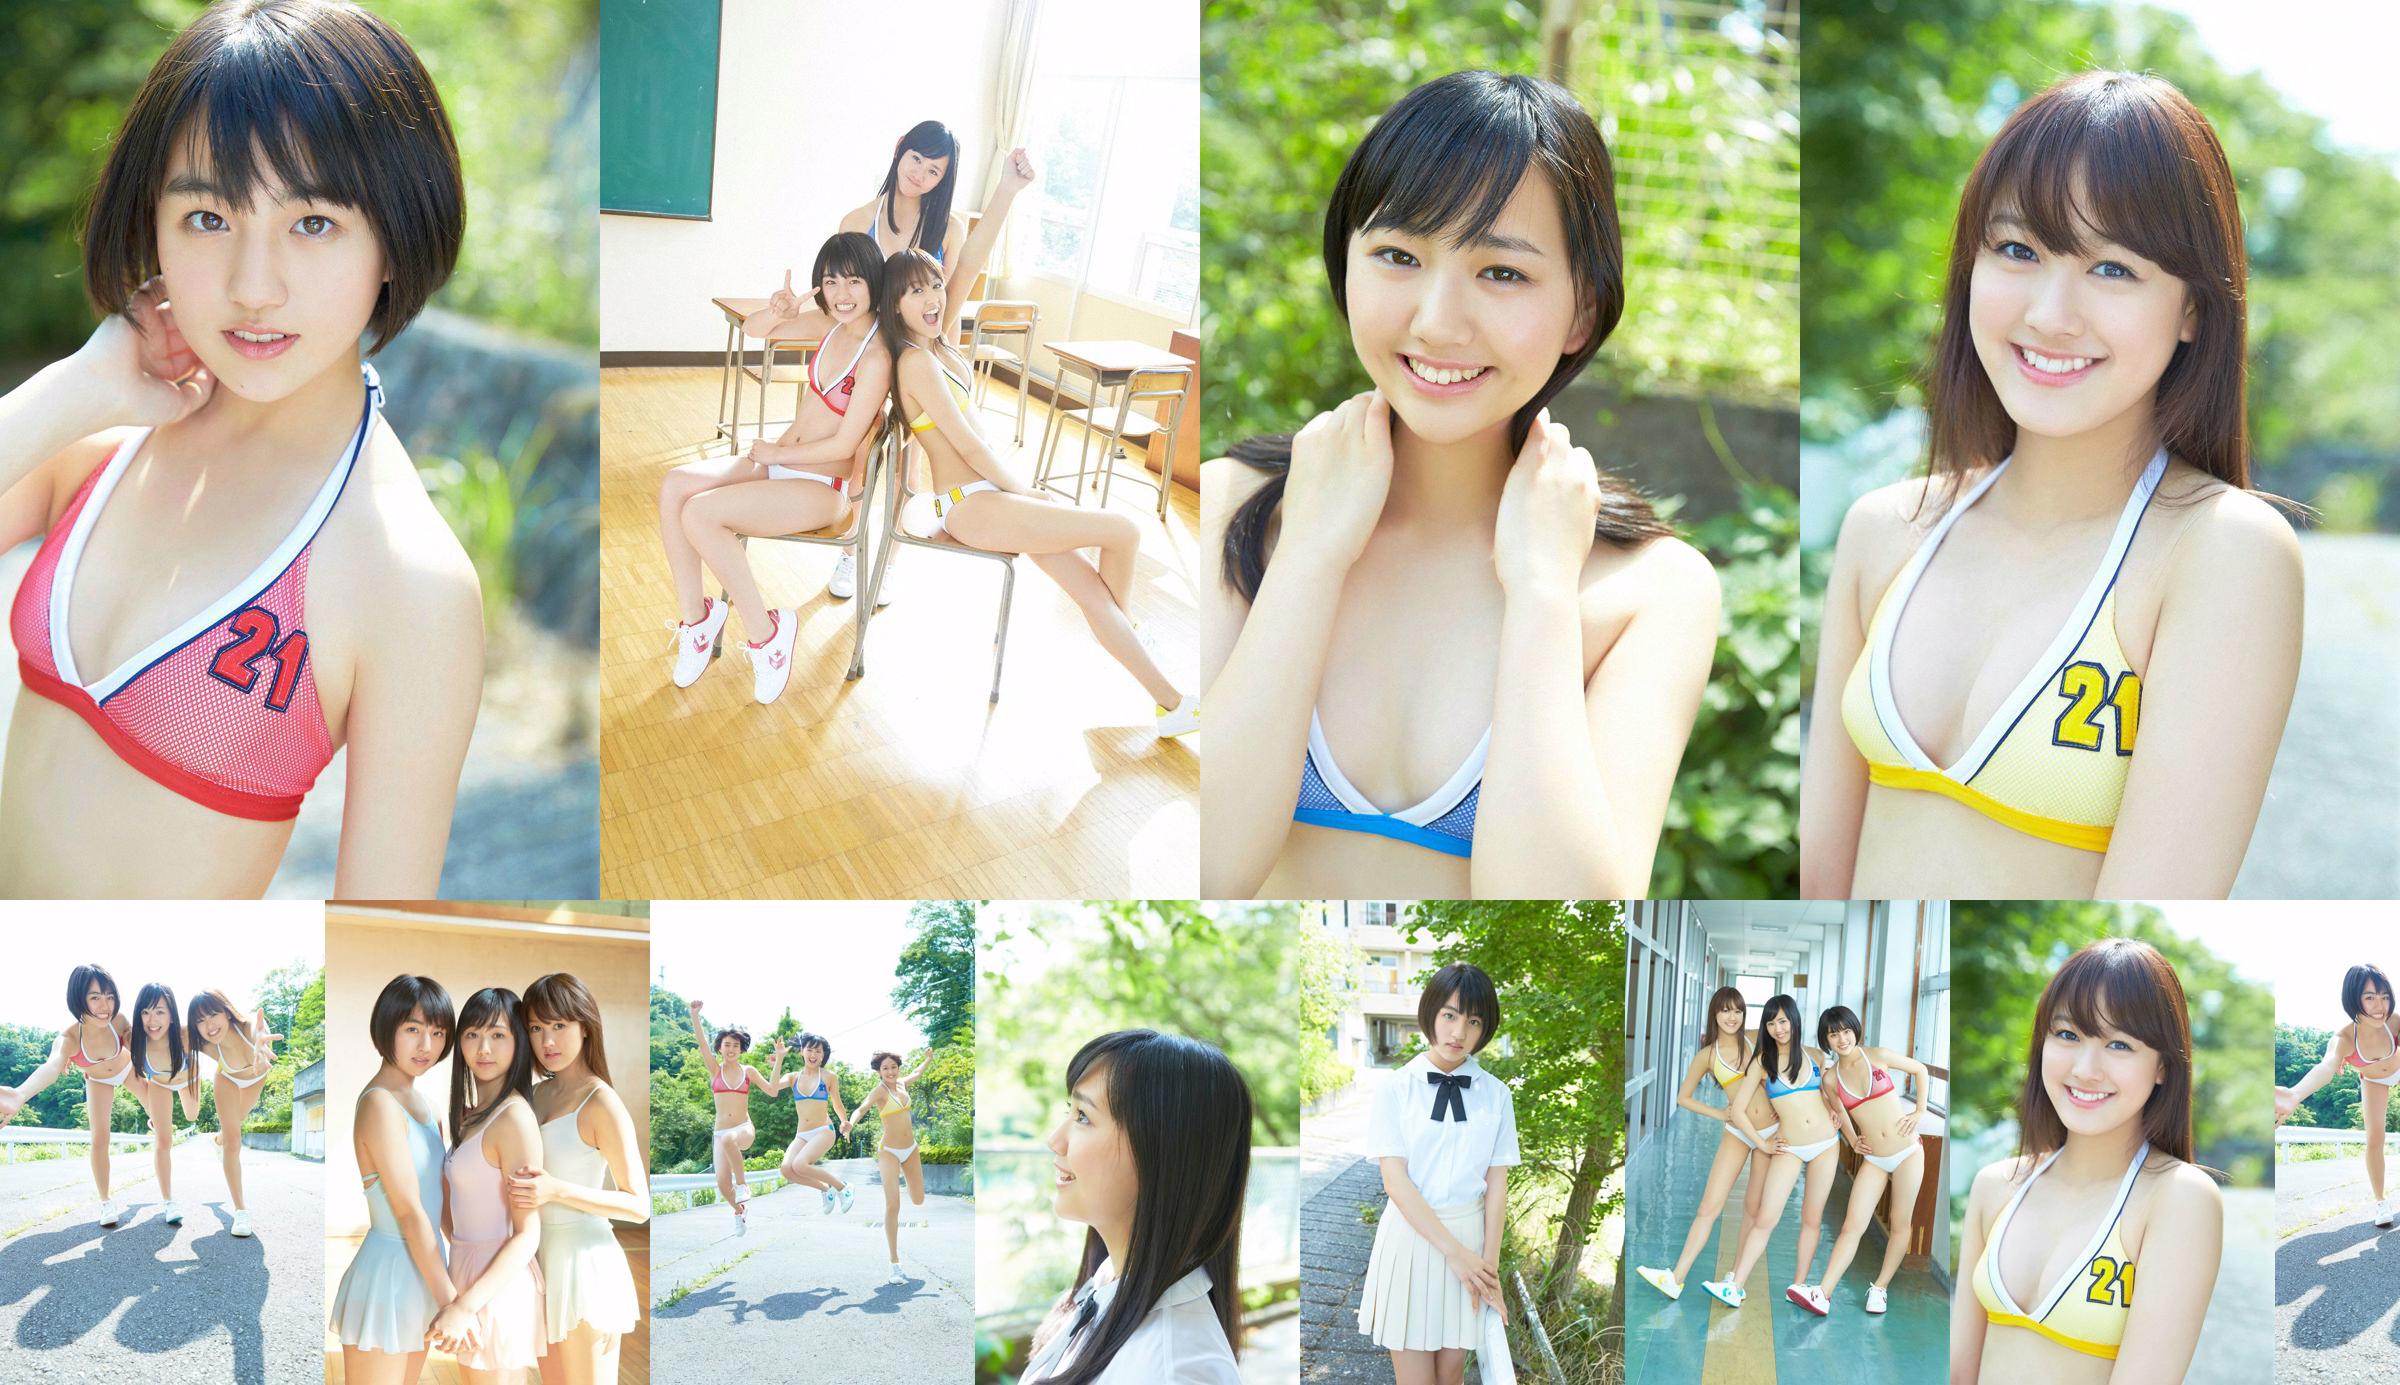 X21 Next Generation Unit X21 << Fall in Love with a Beautiful Girl Summer >> [YS Web] Vol.611 No.e0ca2d หน้า 1